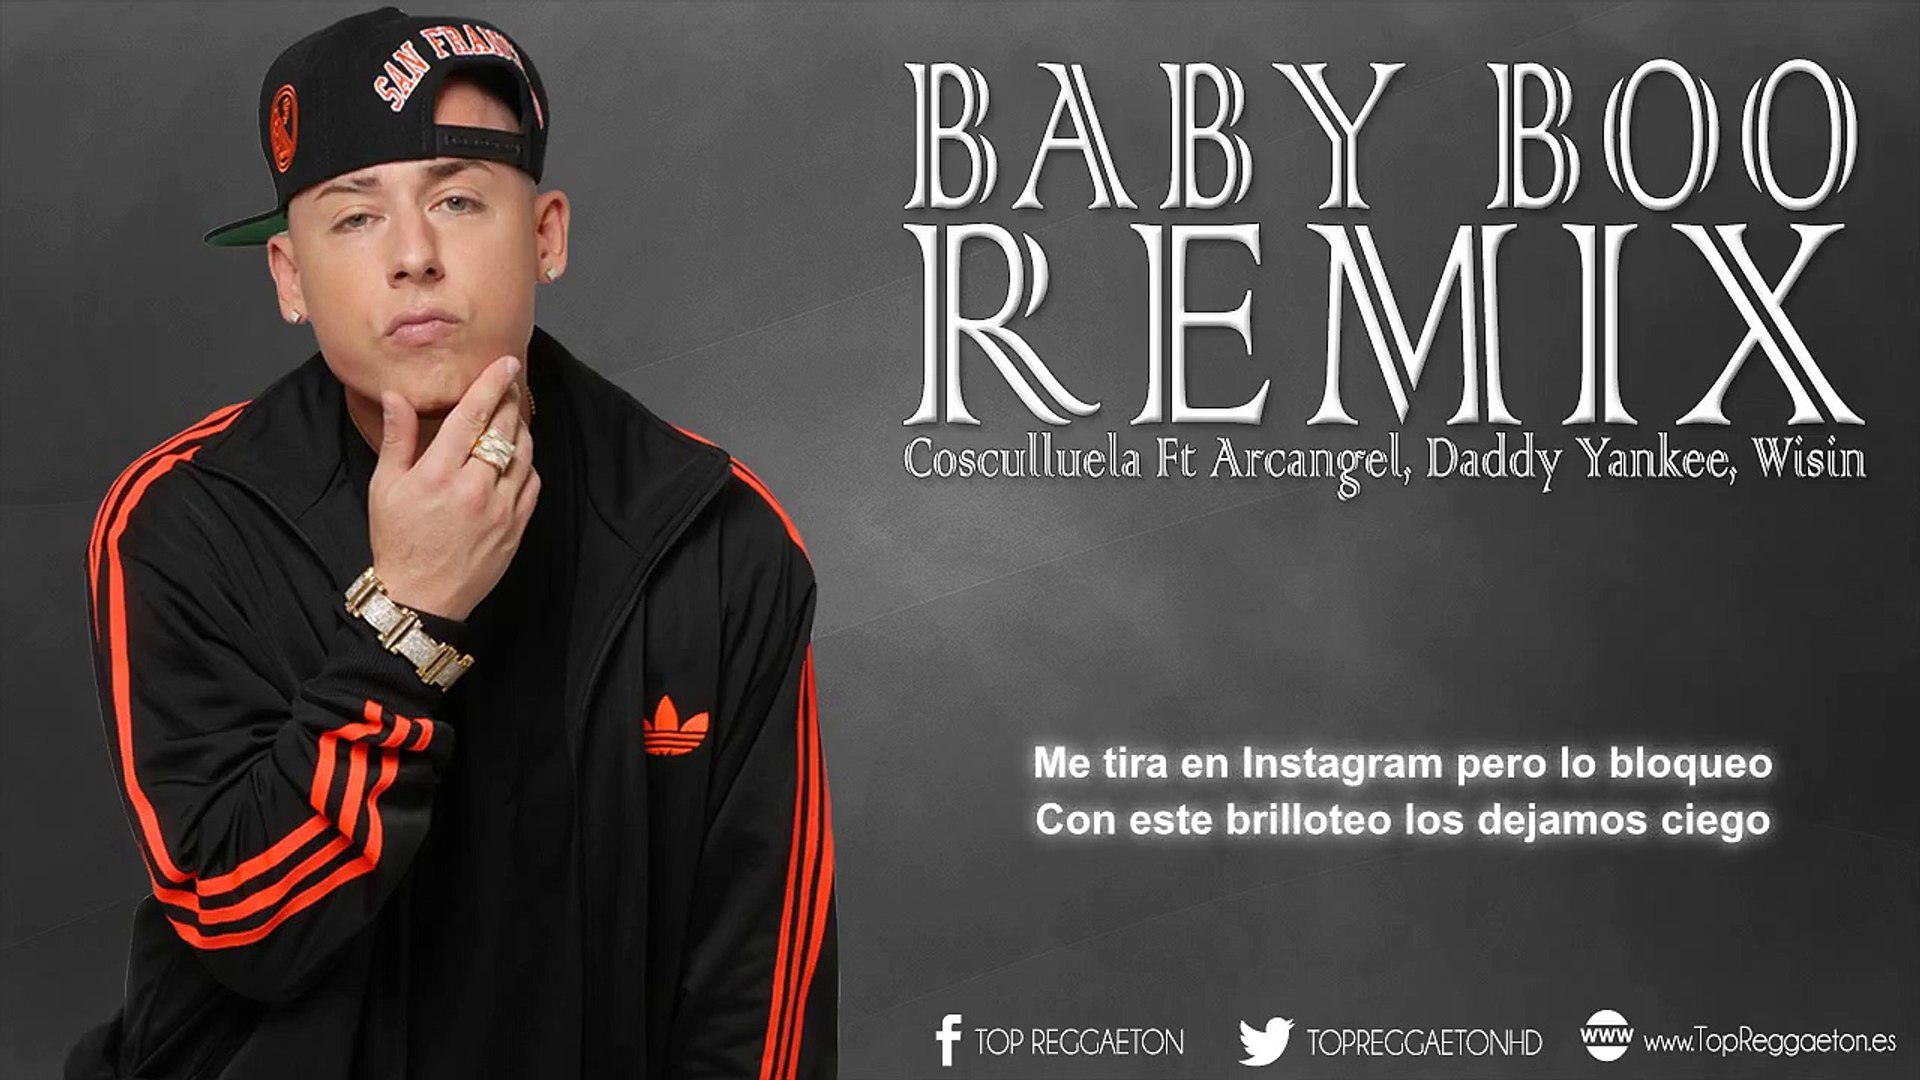 Daddy yankee voy. Cosculluela. Cosculluela фото. Все клипы Daddy Yankee. Daddy Yankee Panda Remix.